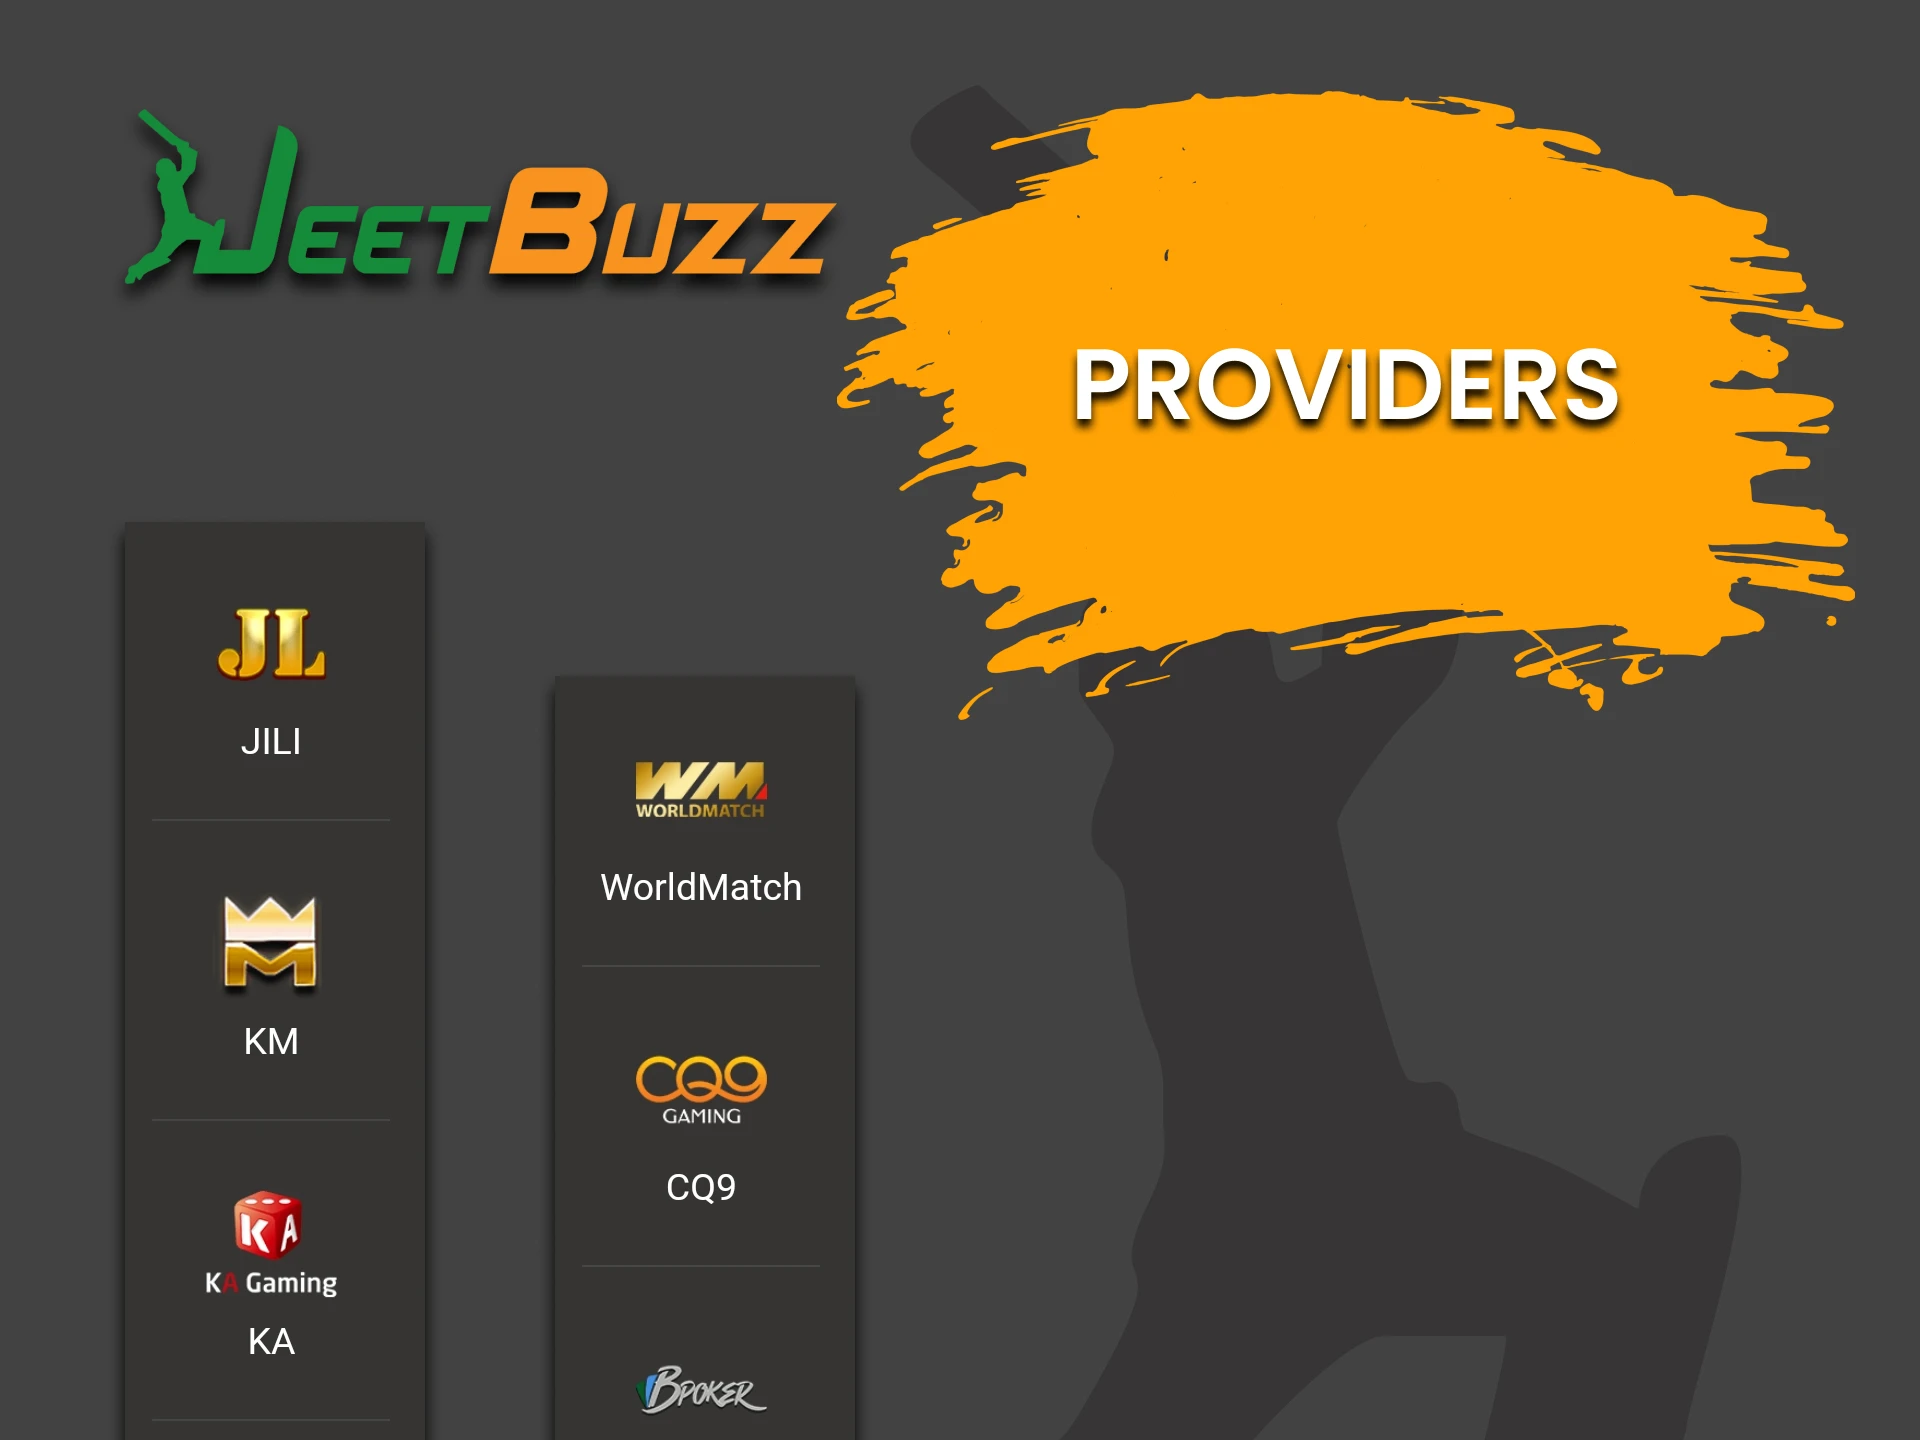 We will talk about table game providers on JeetBuzz.